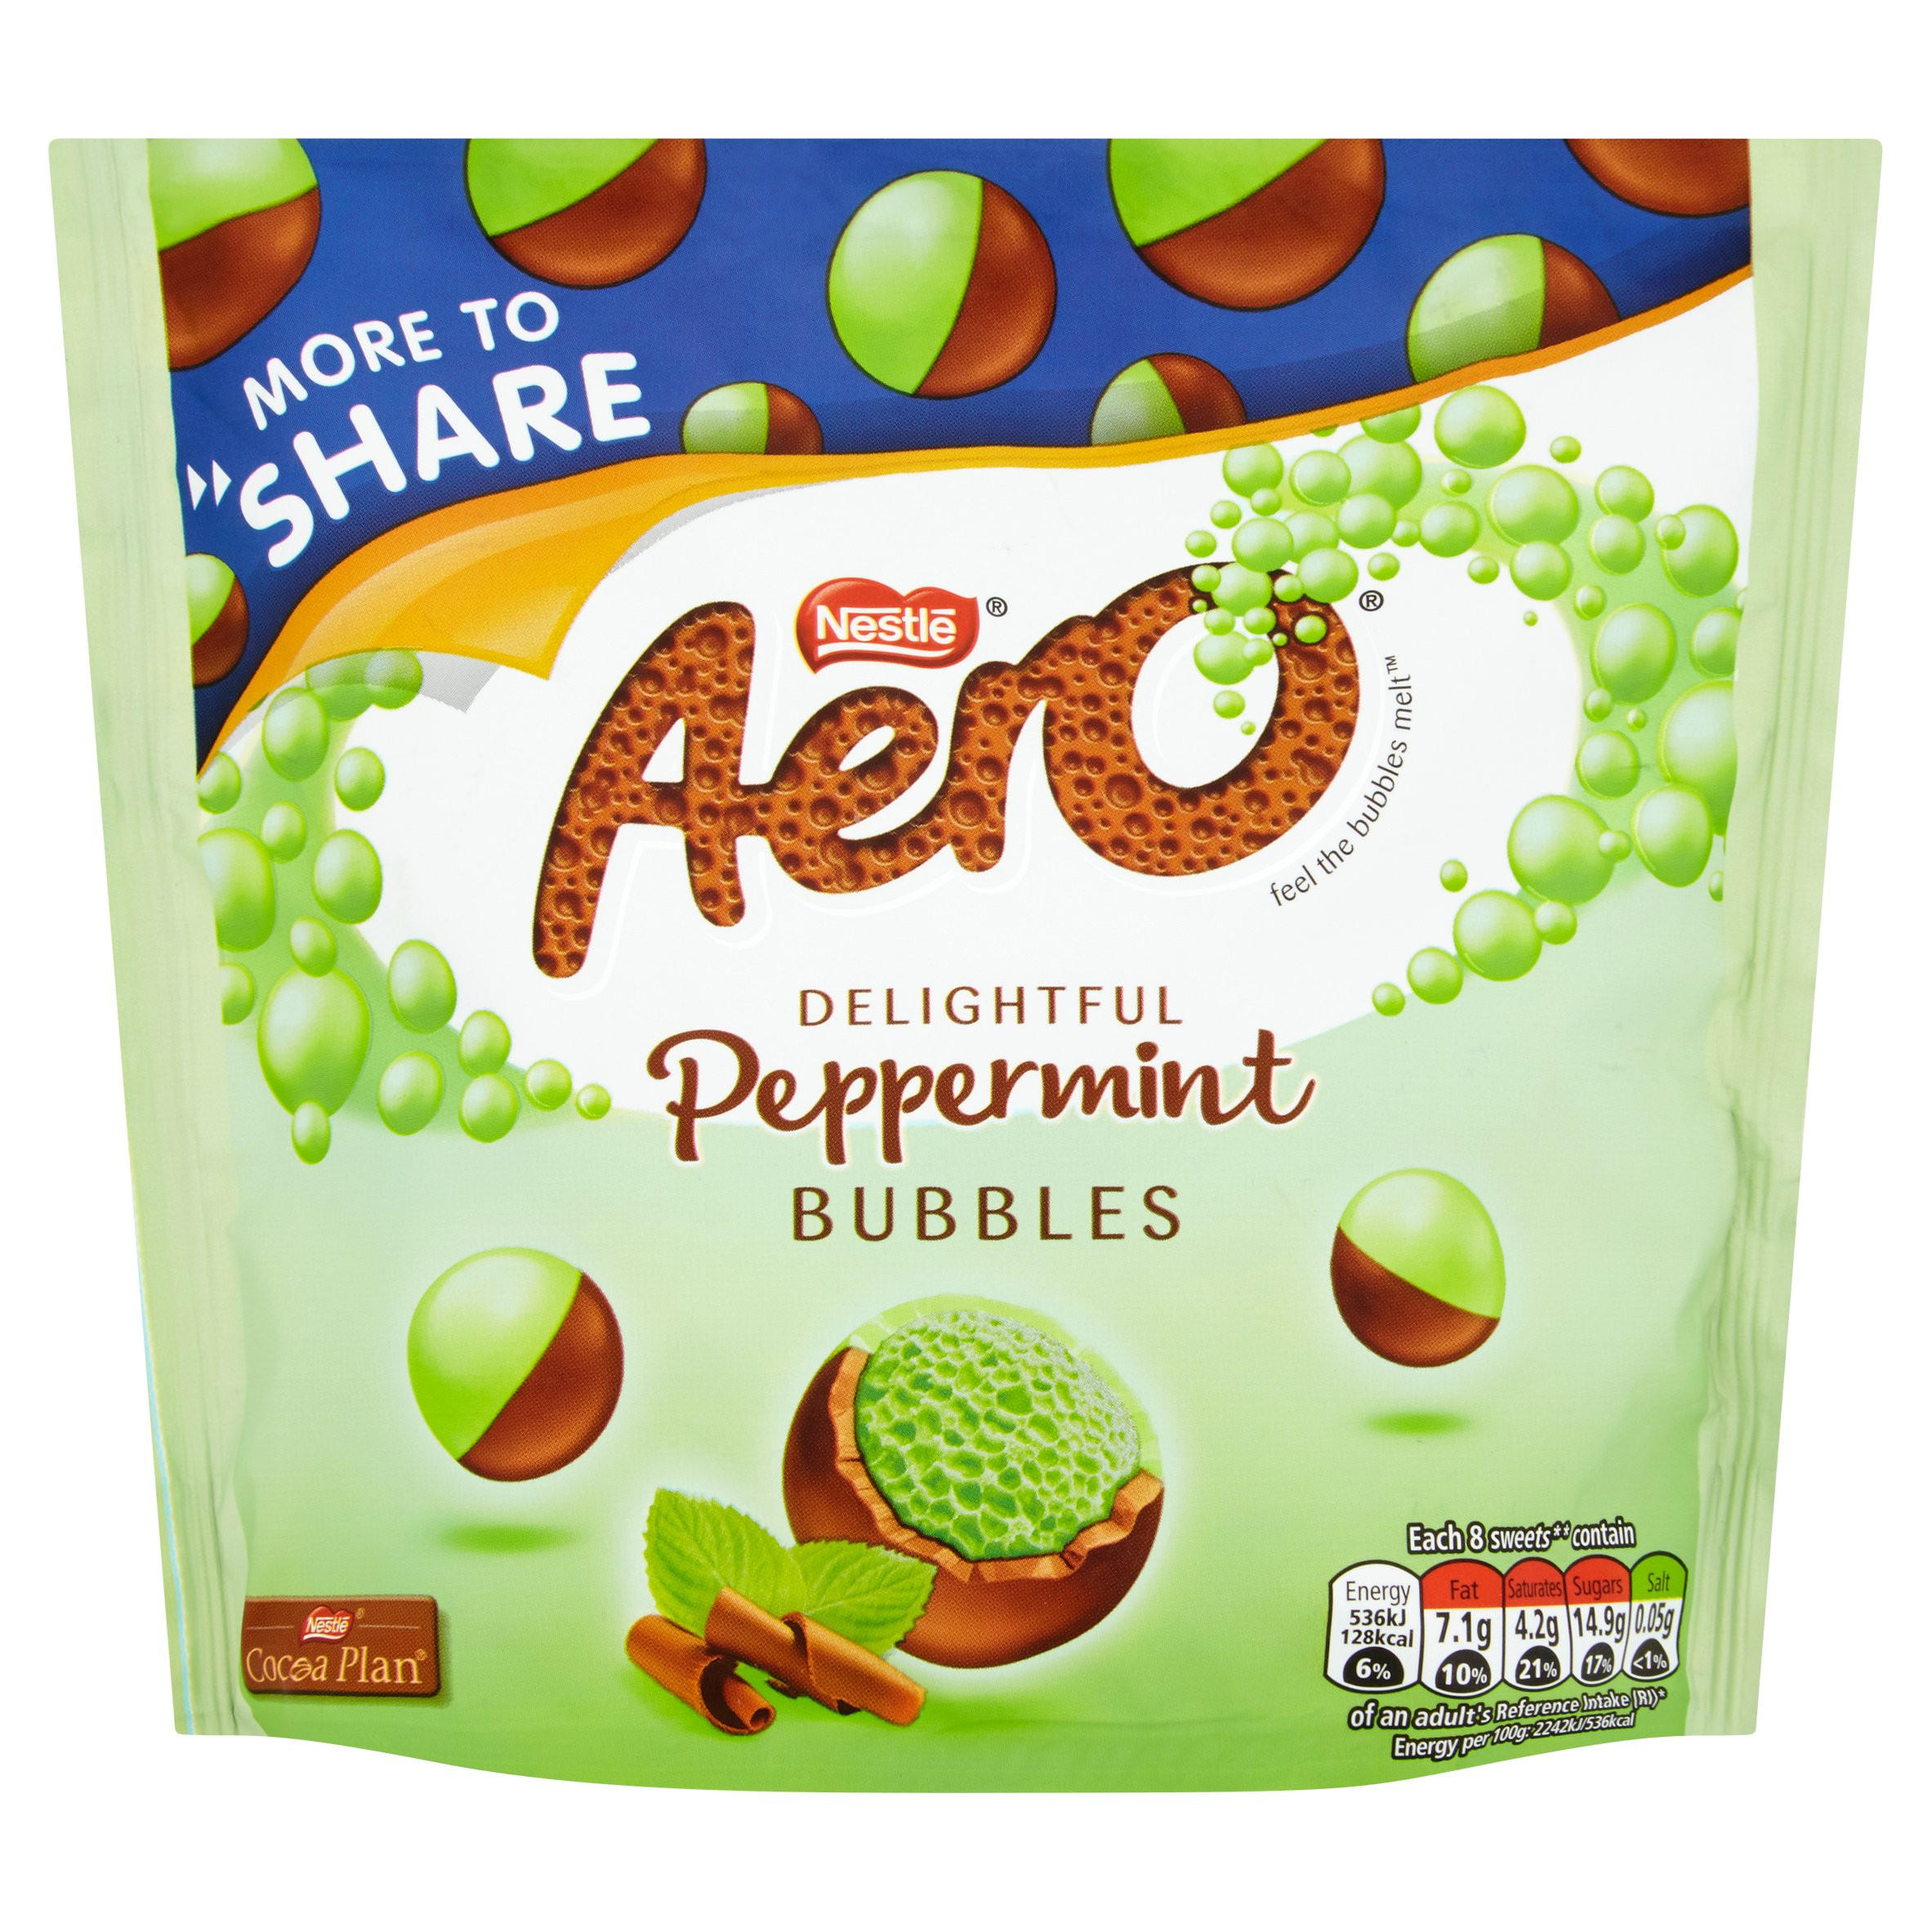 Aero Bubbles Peppermint Mint Chocolate More to Share Pouch 219g